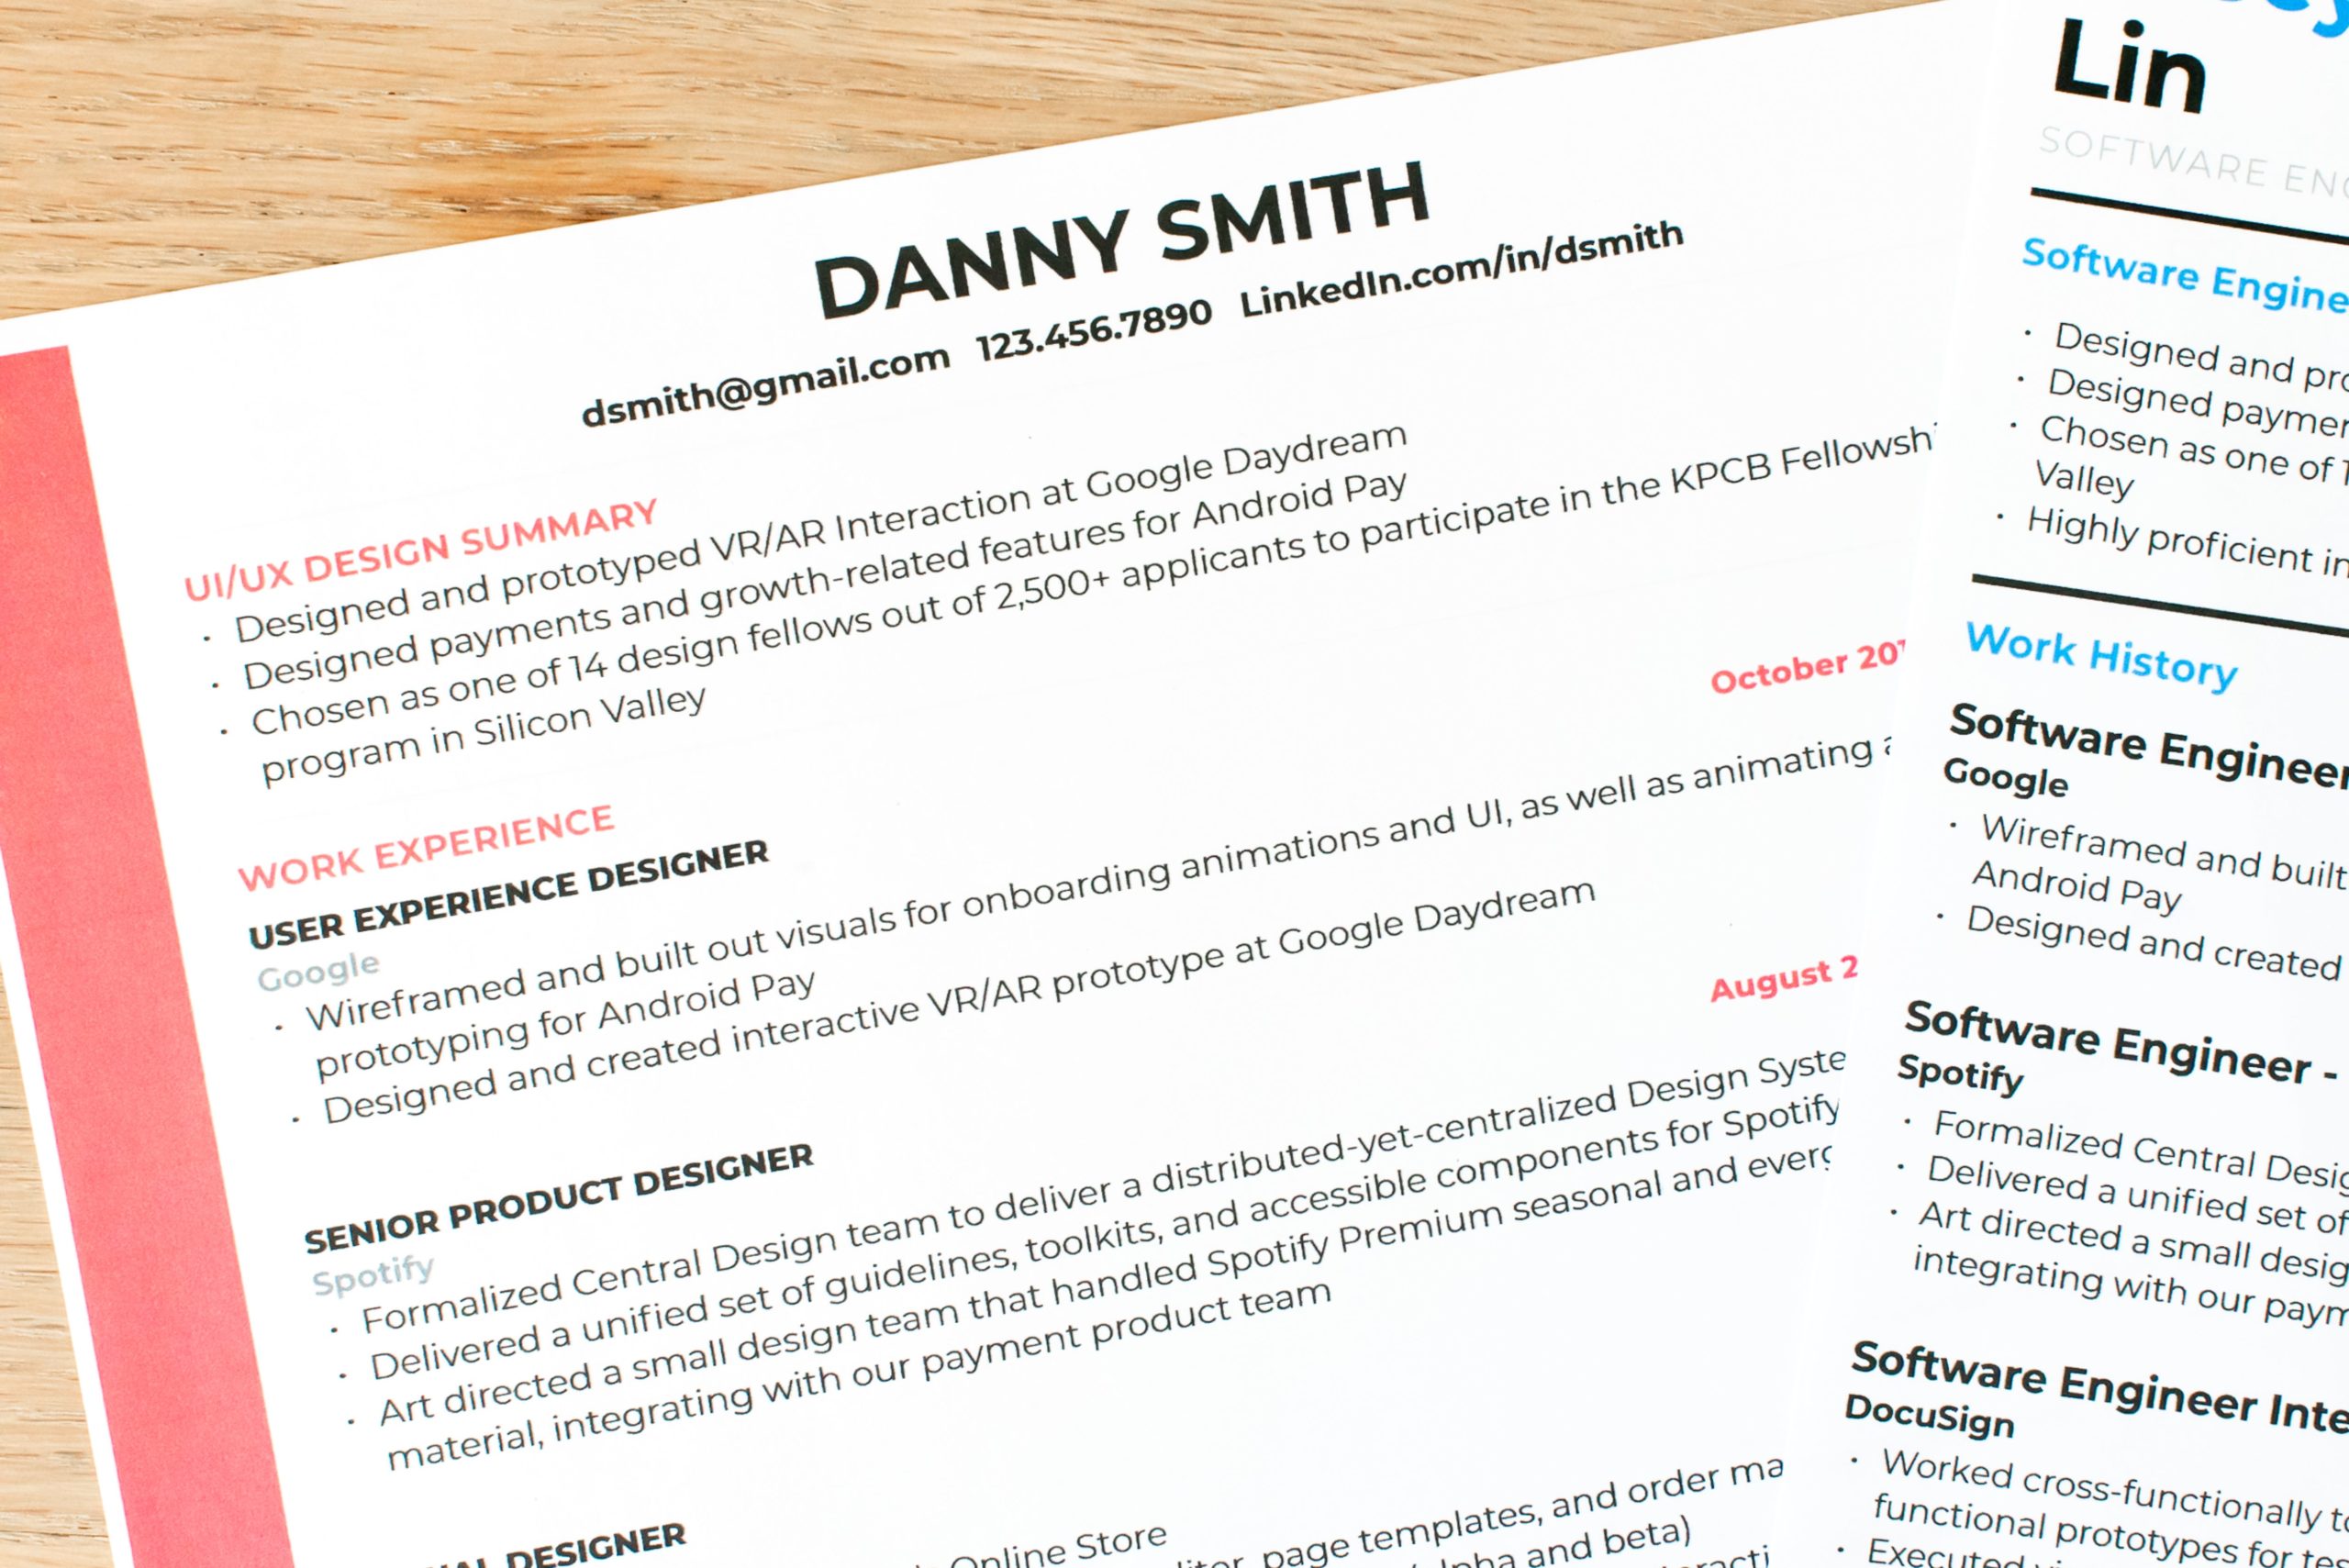 How To Write A Resume Objective That Wins More Jobs [17+ Examples]